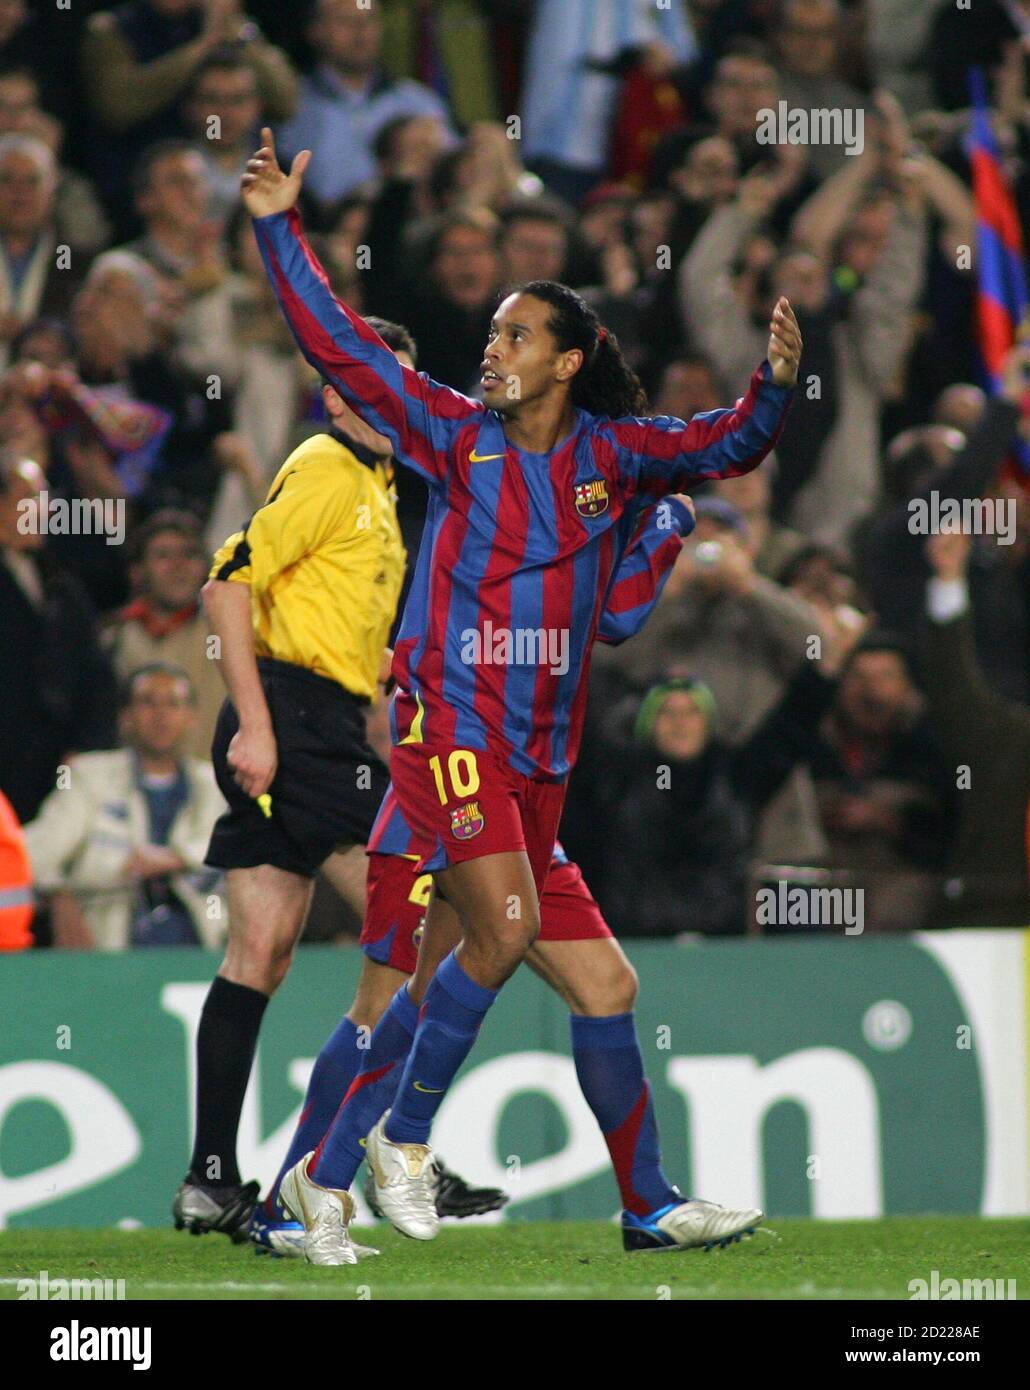 Barcelona S Ronaldinho Of Brazil Celebrates His Goal Against Chelsea With Fans During Their Champions League First Knockout Round Return Leg Soccer Match At Nou Camp Stadium In Barcelona Spain March 7 06